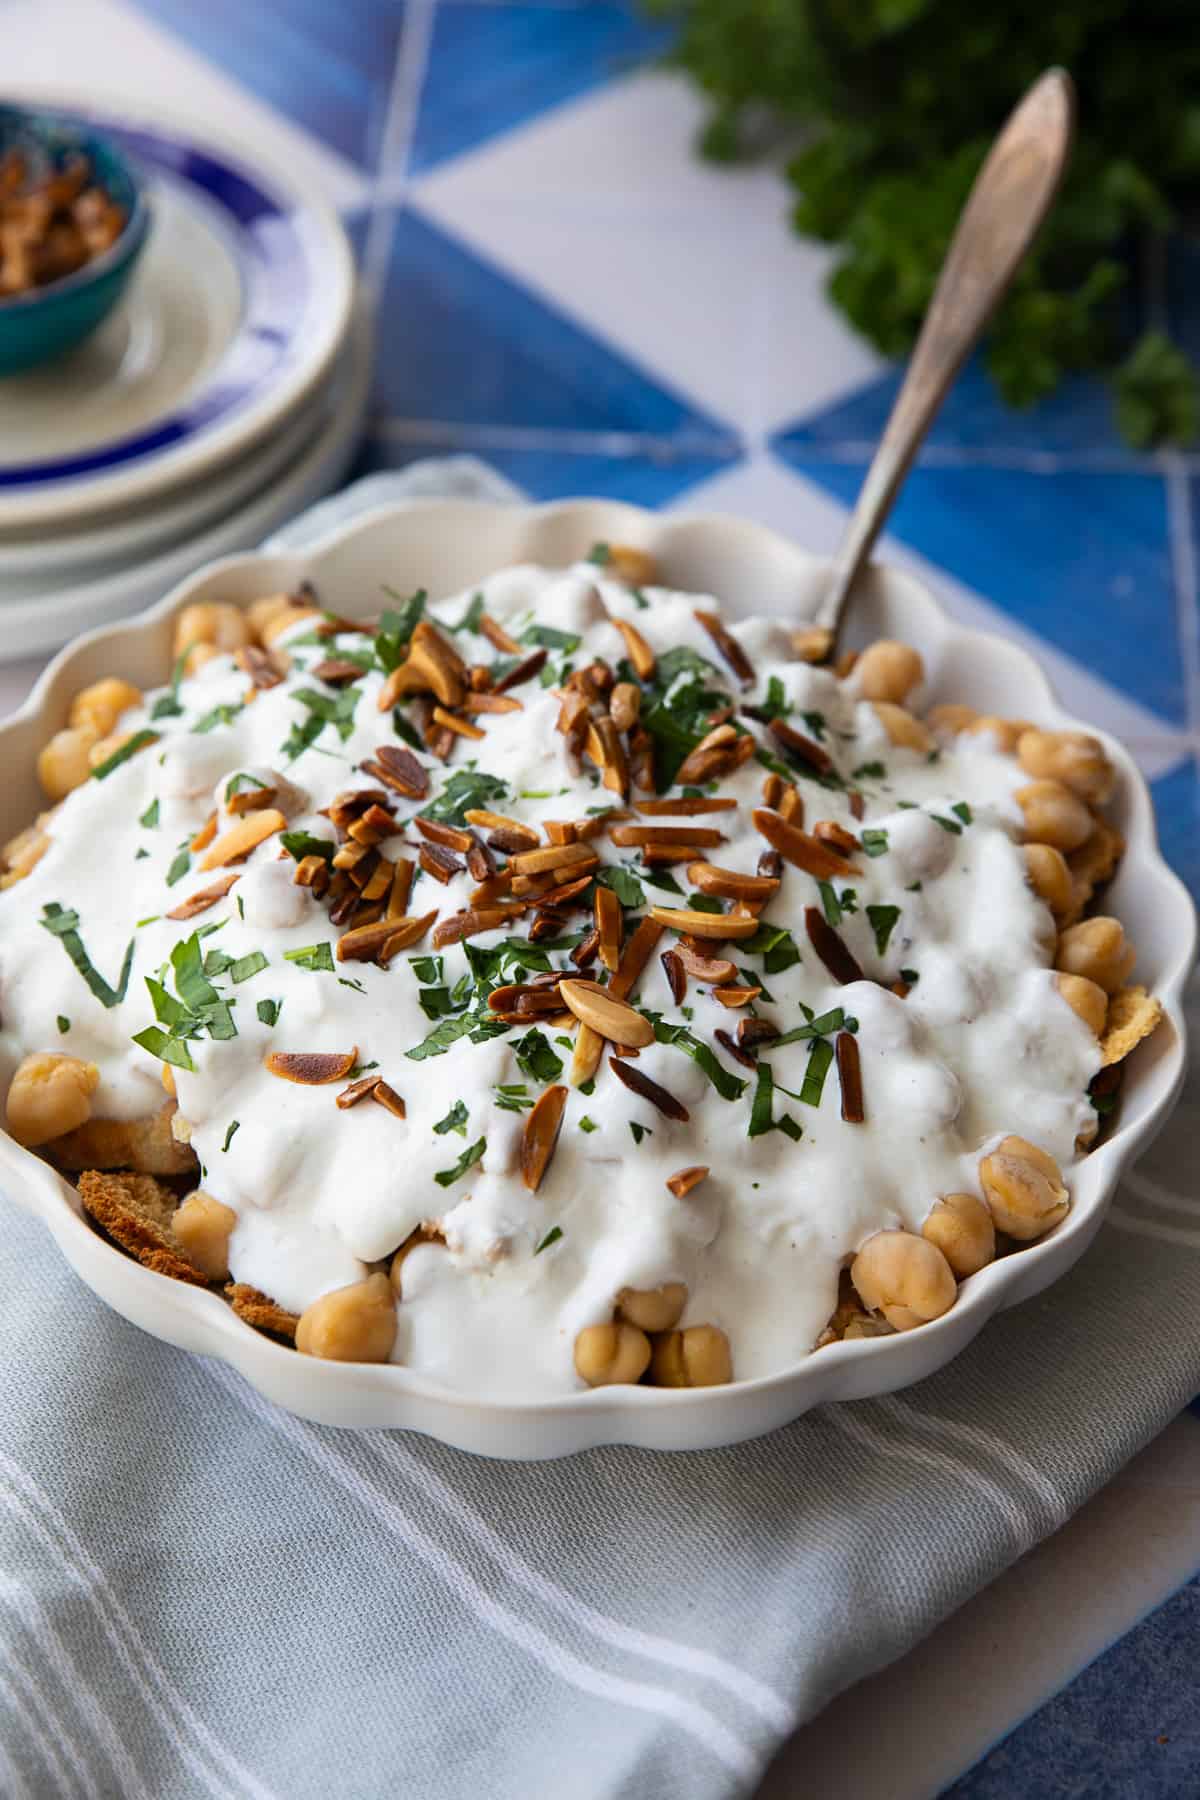 Fatteh dish made with layers of toasted pita, creamy yogurt, flavorful chickpeas, and garnished with slithered almonds are parsley